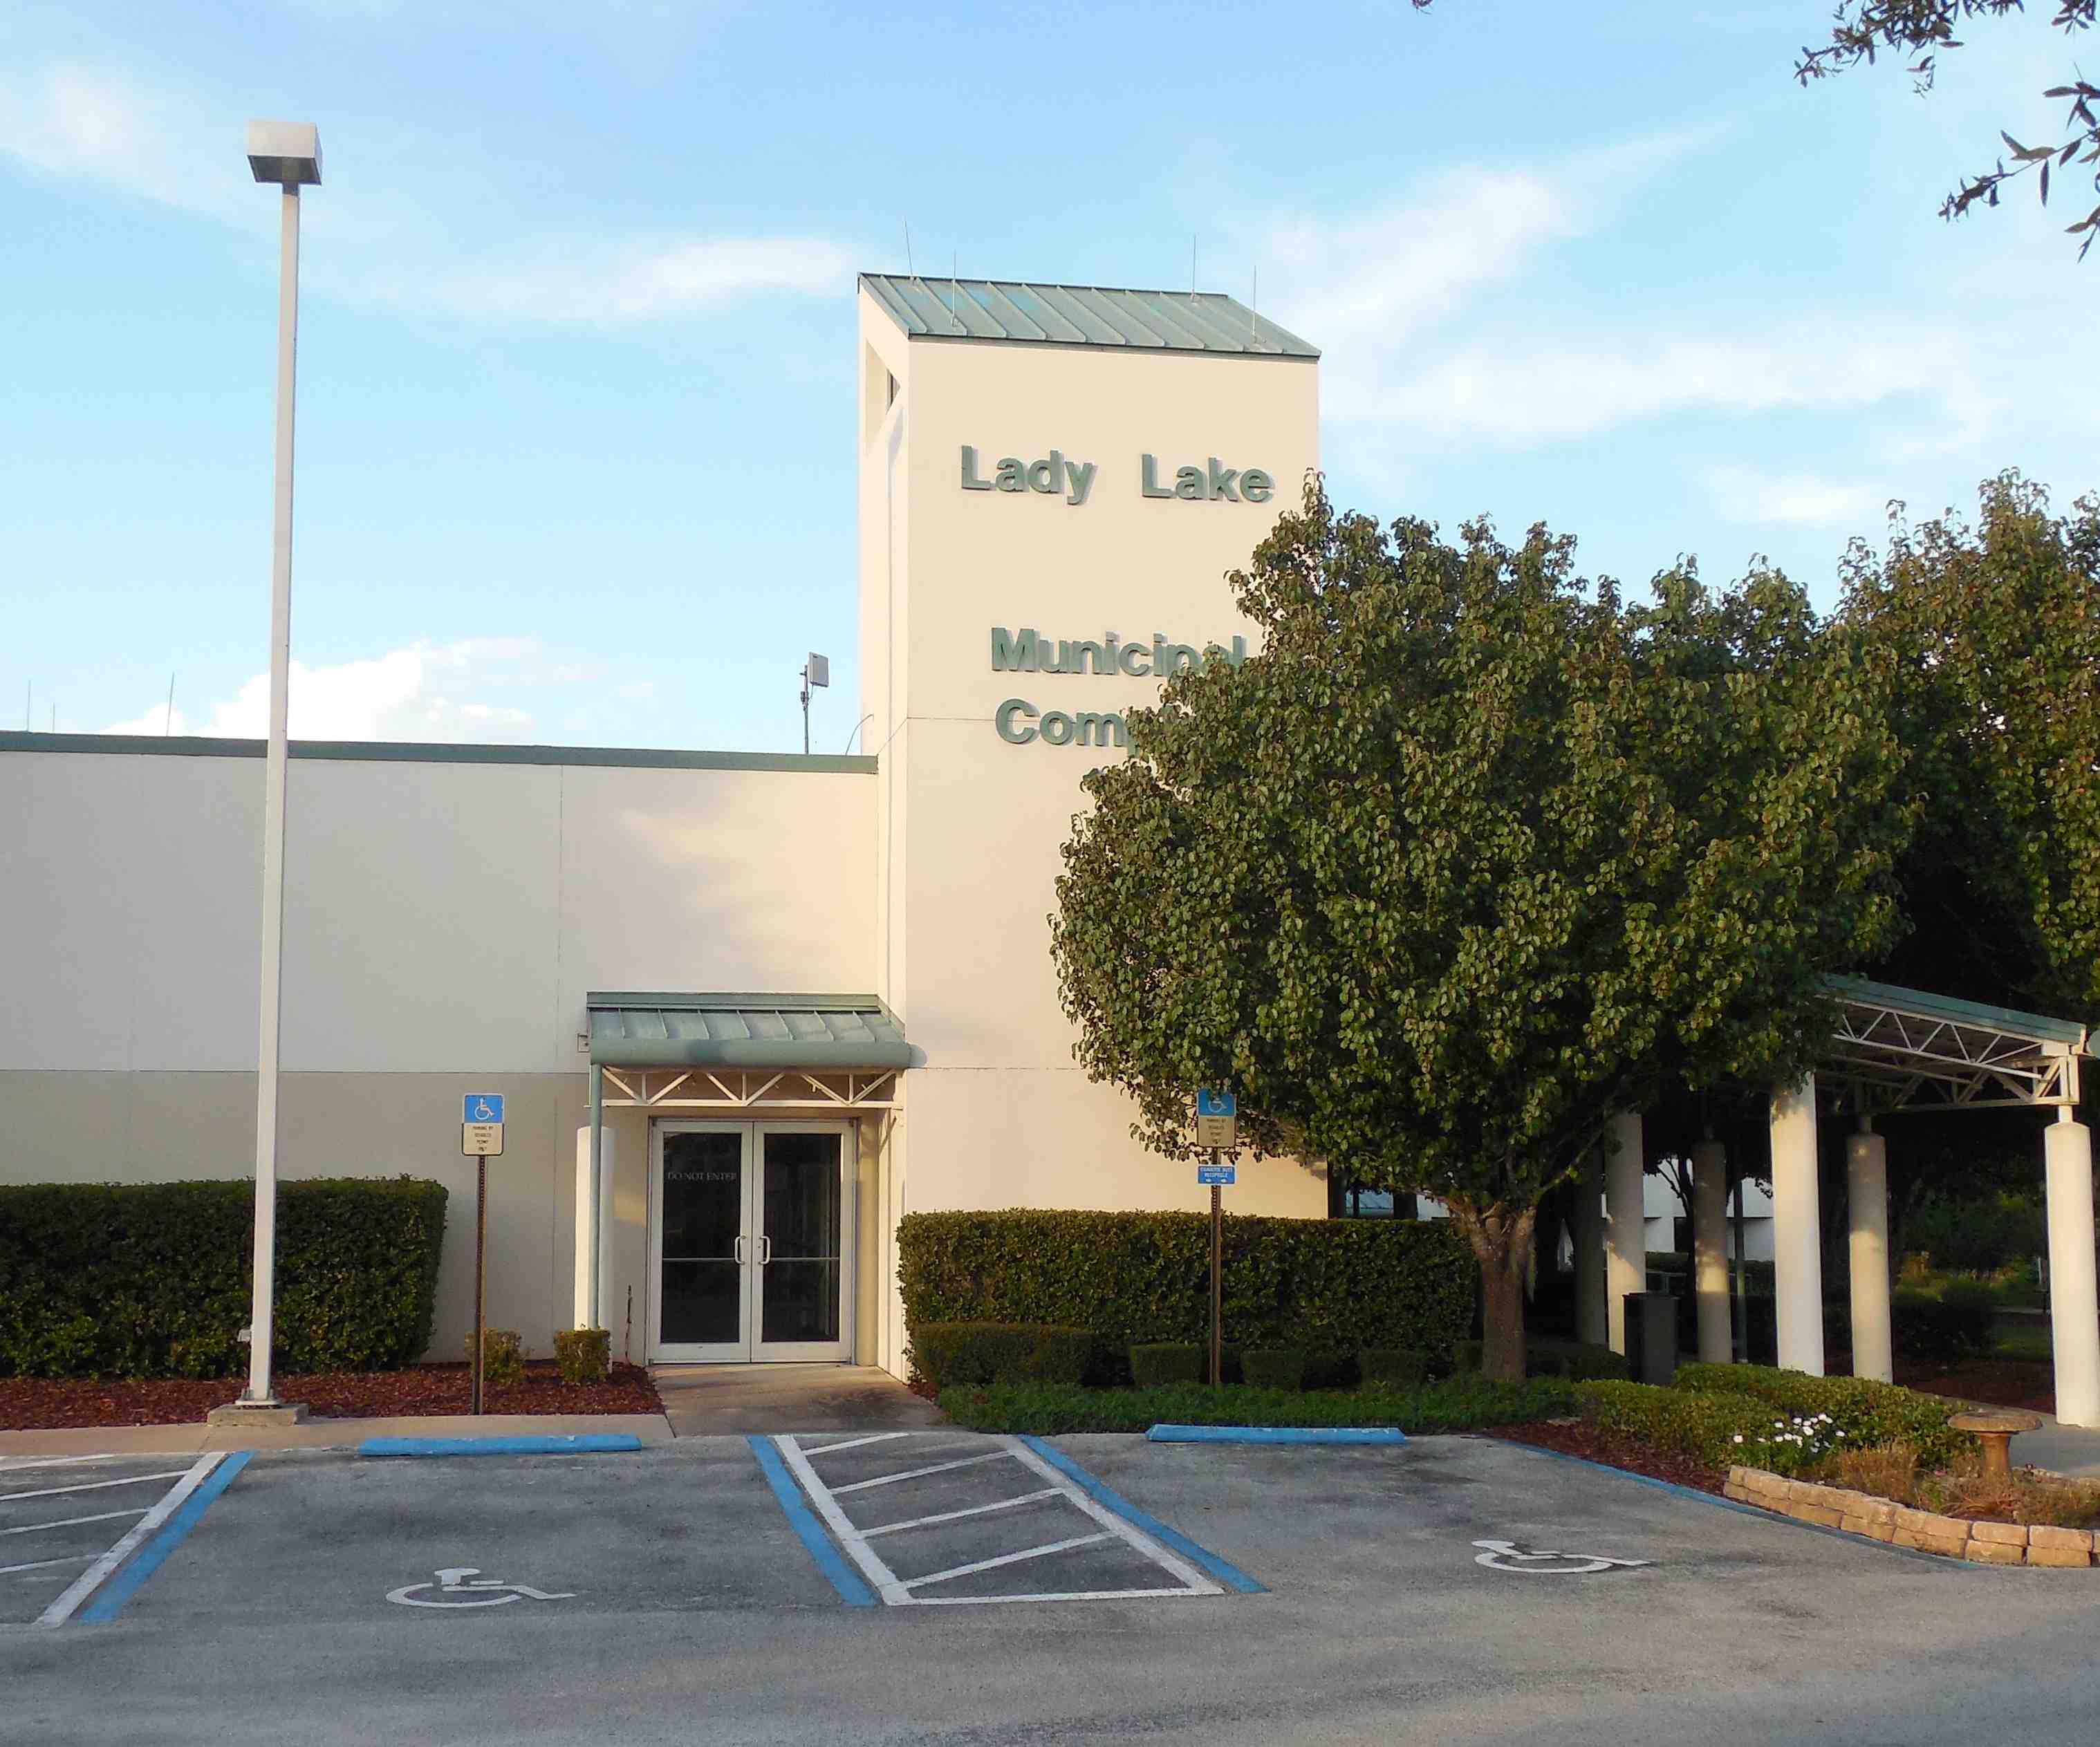 Lady Lake commissioners rail against six-figure salary paid to top manager